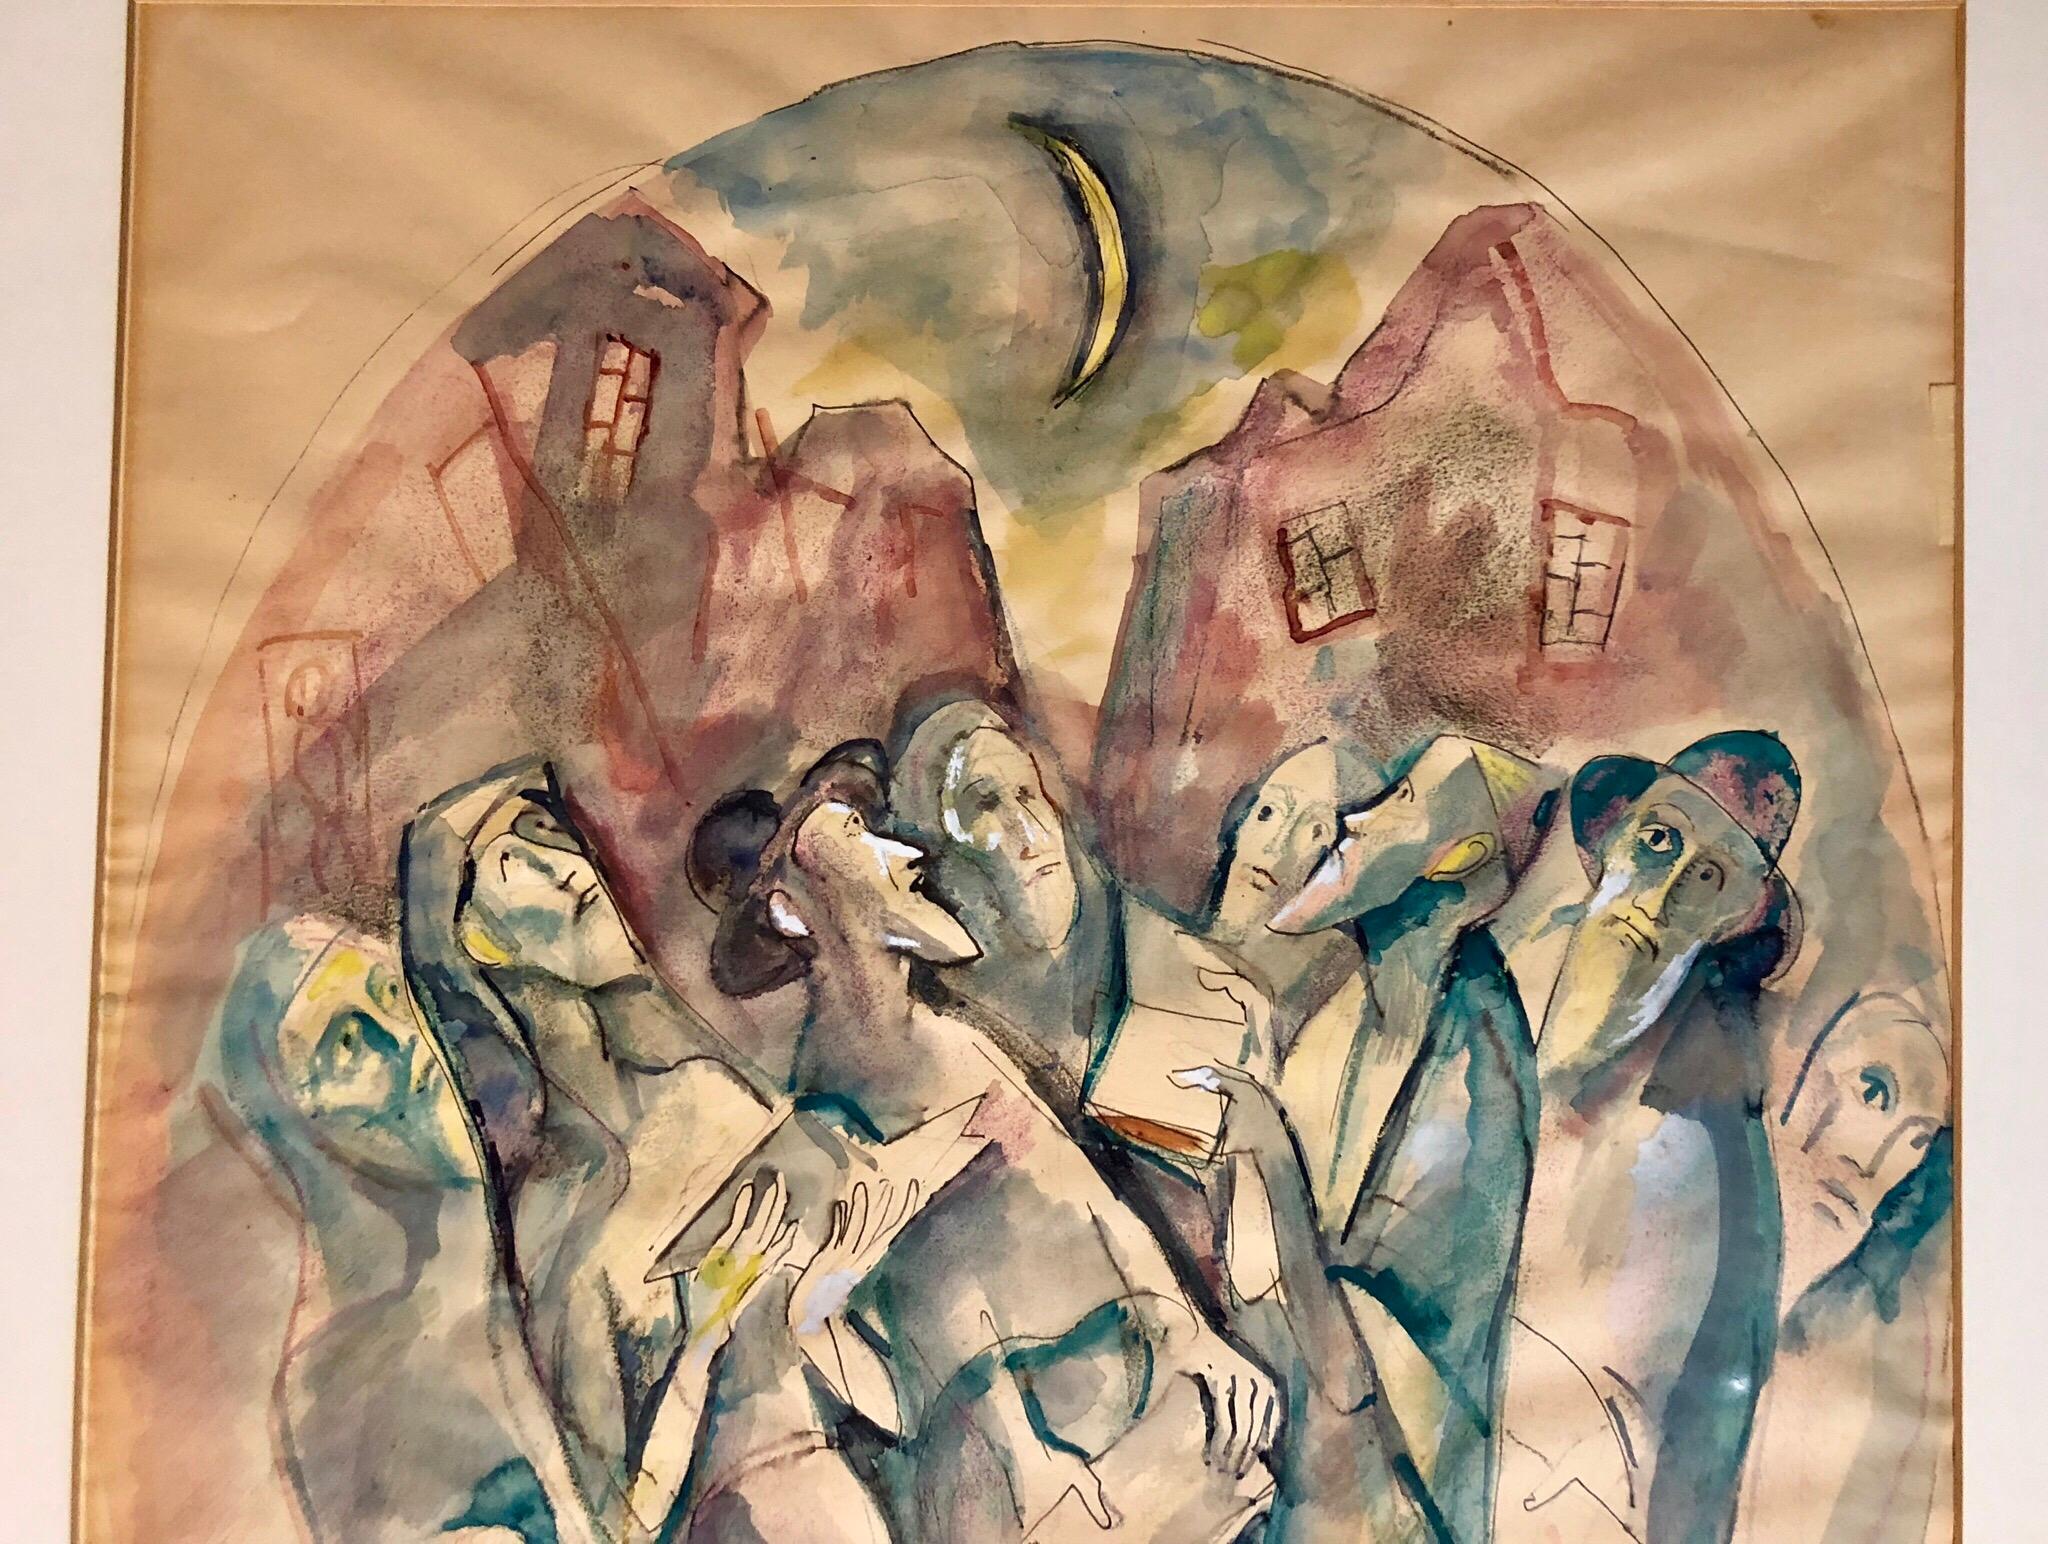 Genre: Judaic prayer scene
Subject: Landscape
Medium: watercolor
Surface: Paper
Country: United States

EMANUEL ROMANO
Rome, Italy, b. 1897, d. 1984
Emanuel Glicenstein Romano was born in Rome, September 23, 1897. 

His father Henryk Glicenstein was